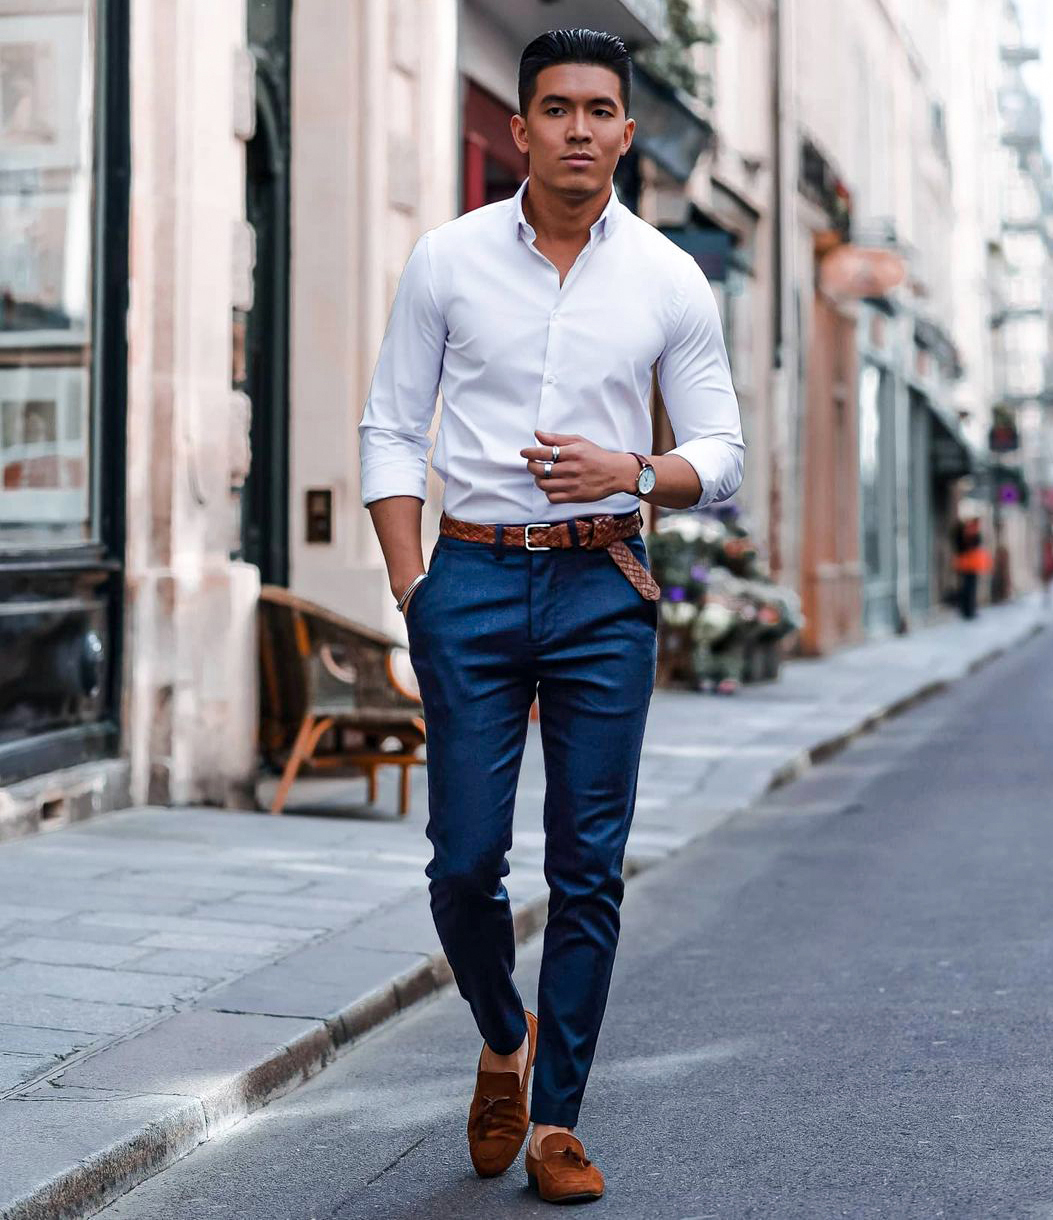 6 Outfit Ideas For White Shirt, Blue Pants, and Brown Shoes